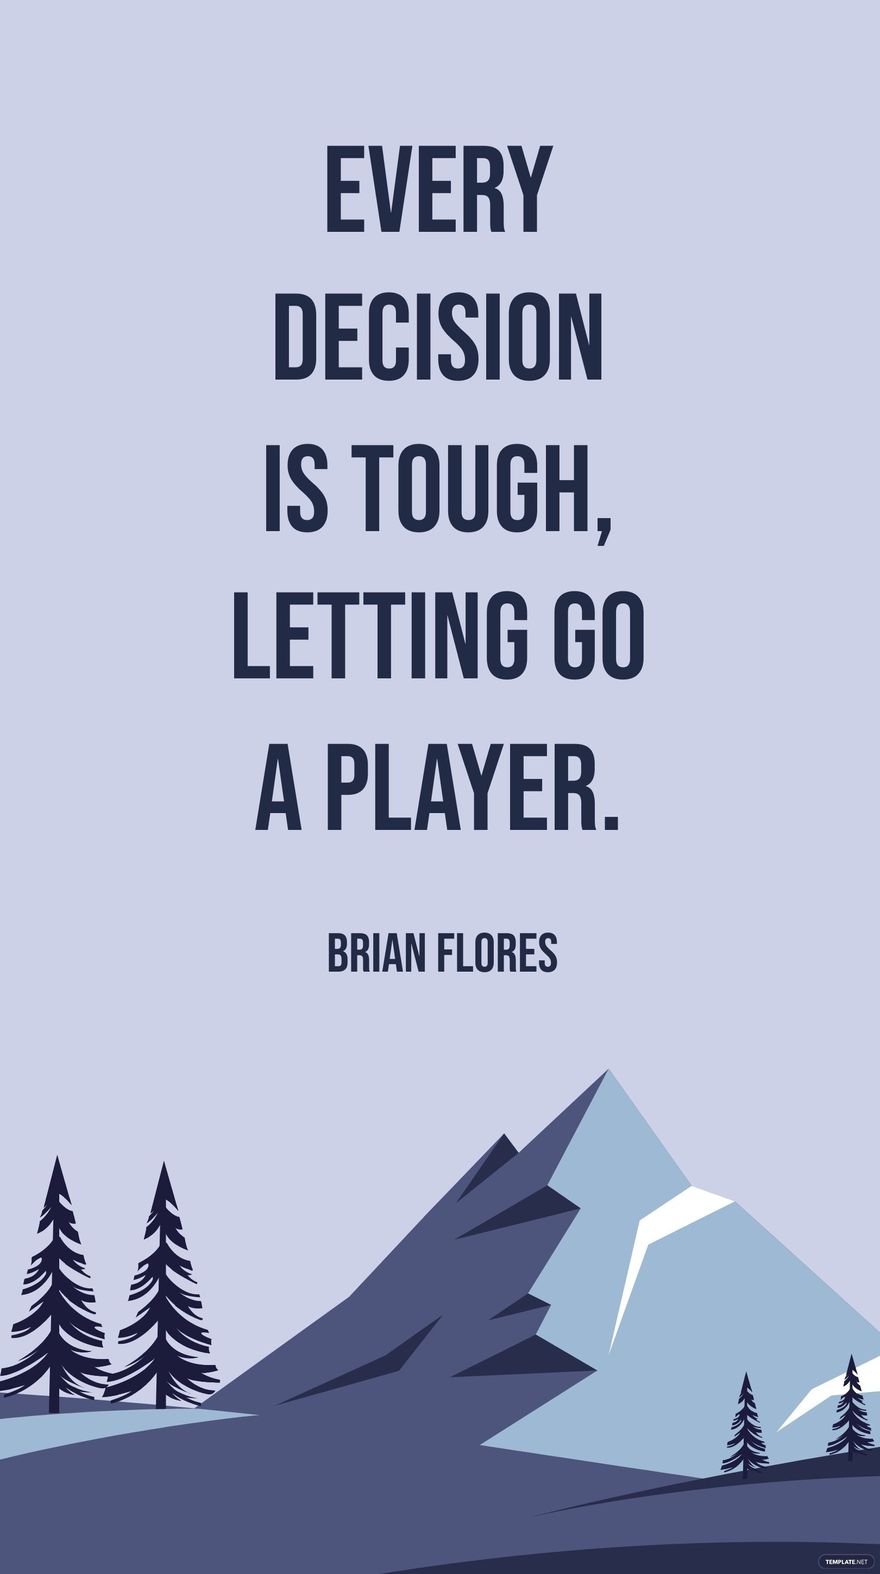 Brian Flores -Every decision is tough, letting go a player. in JPG